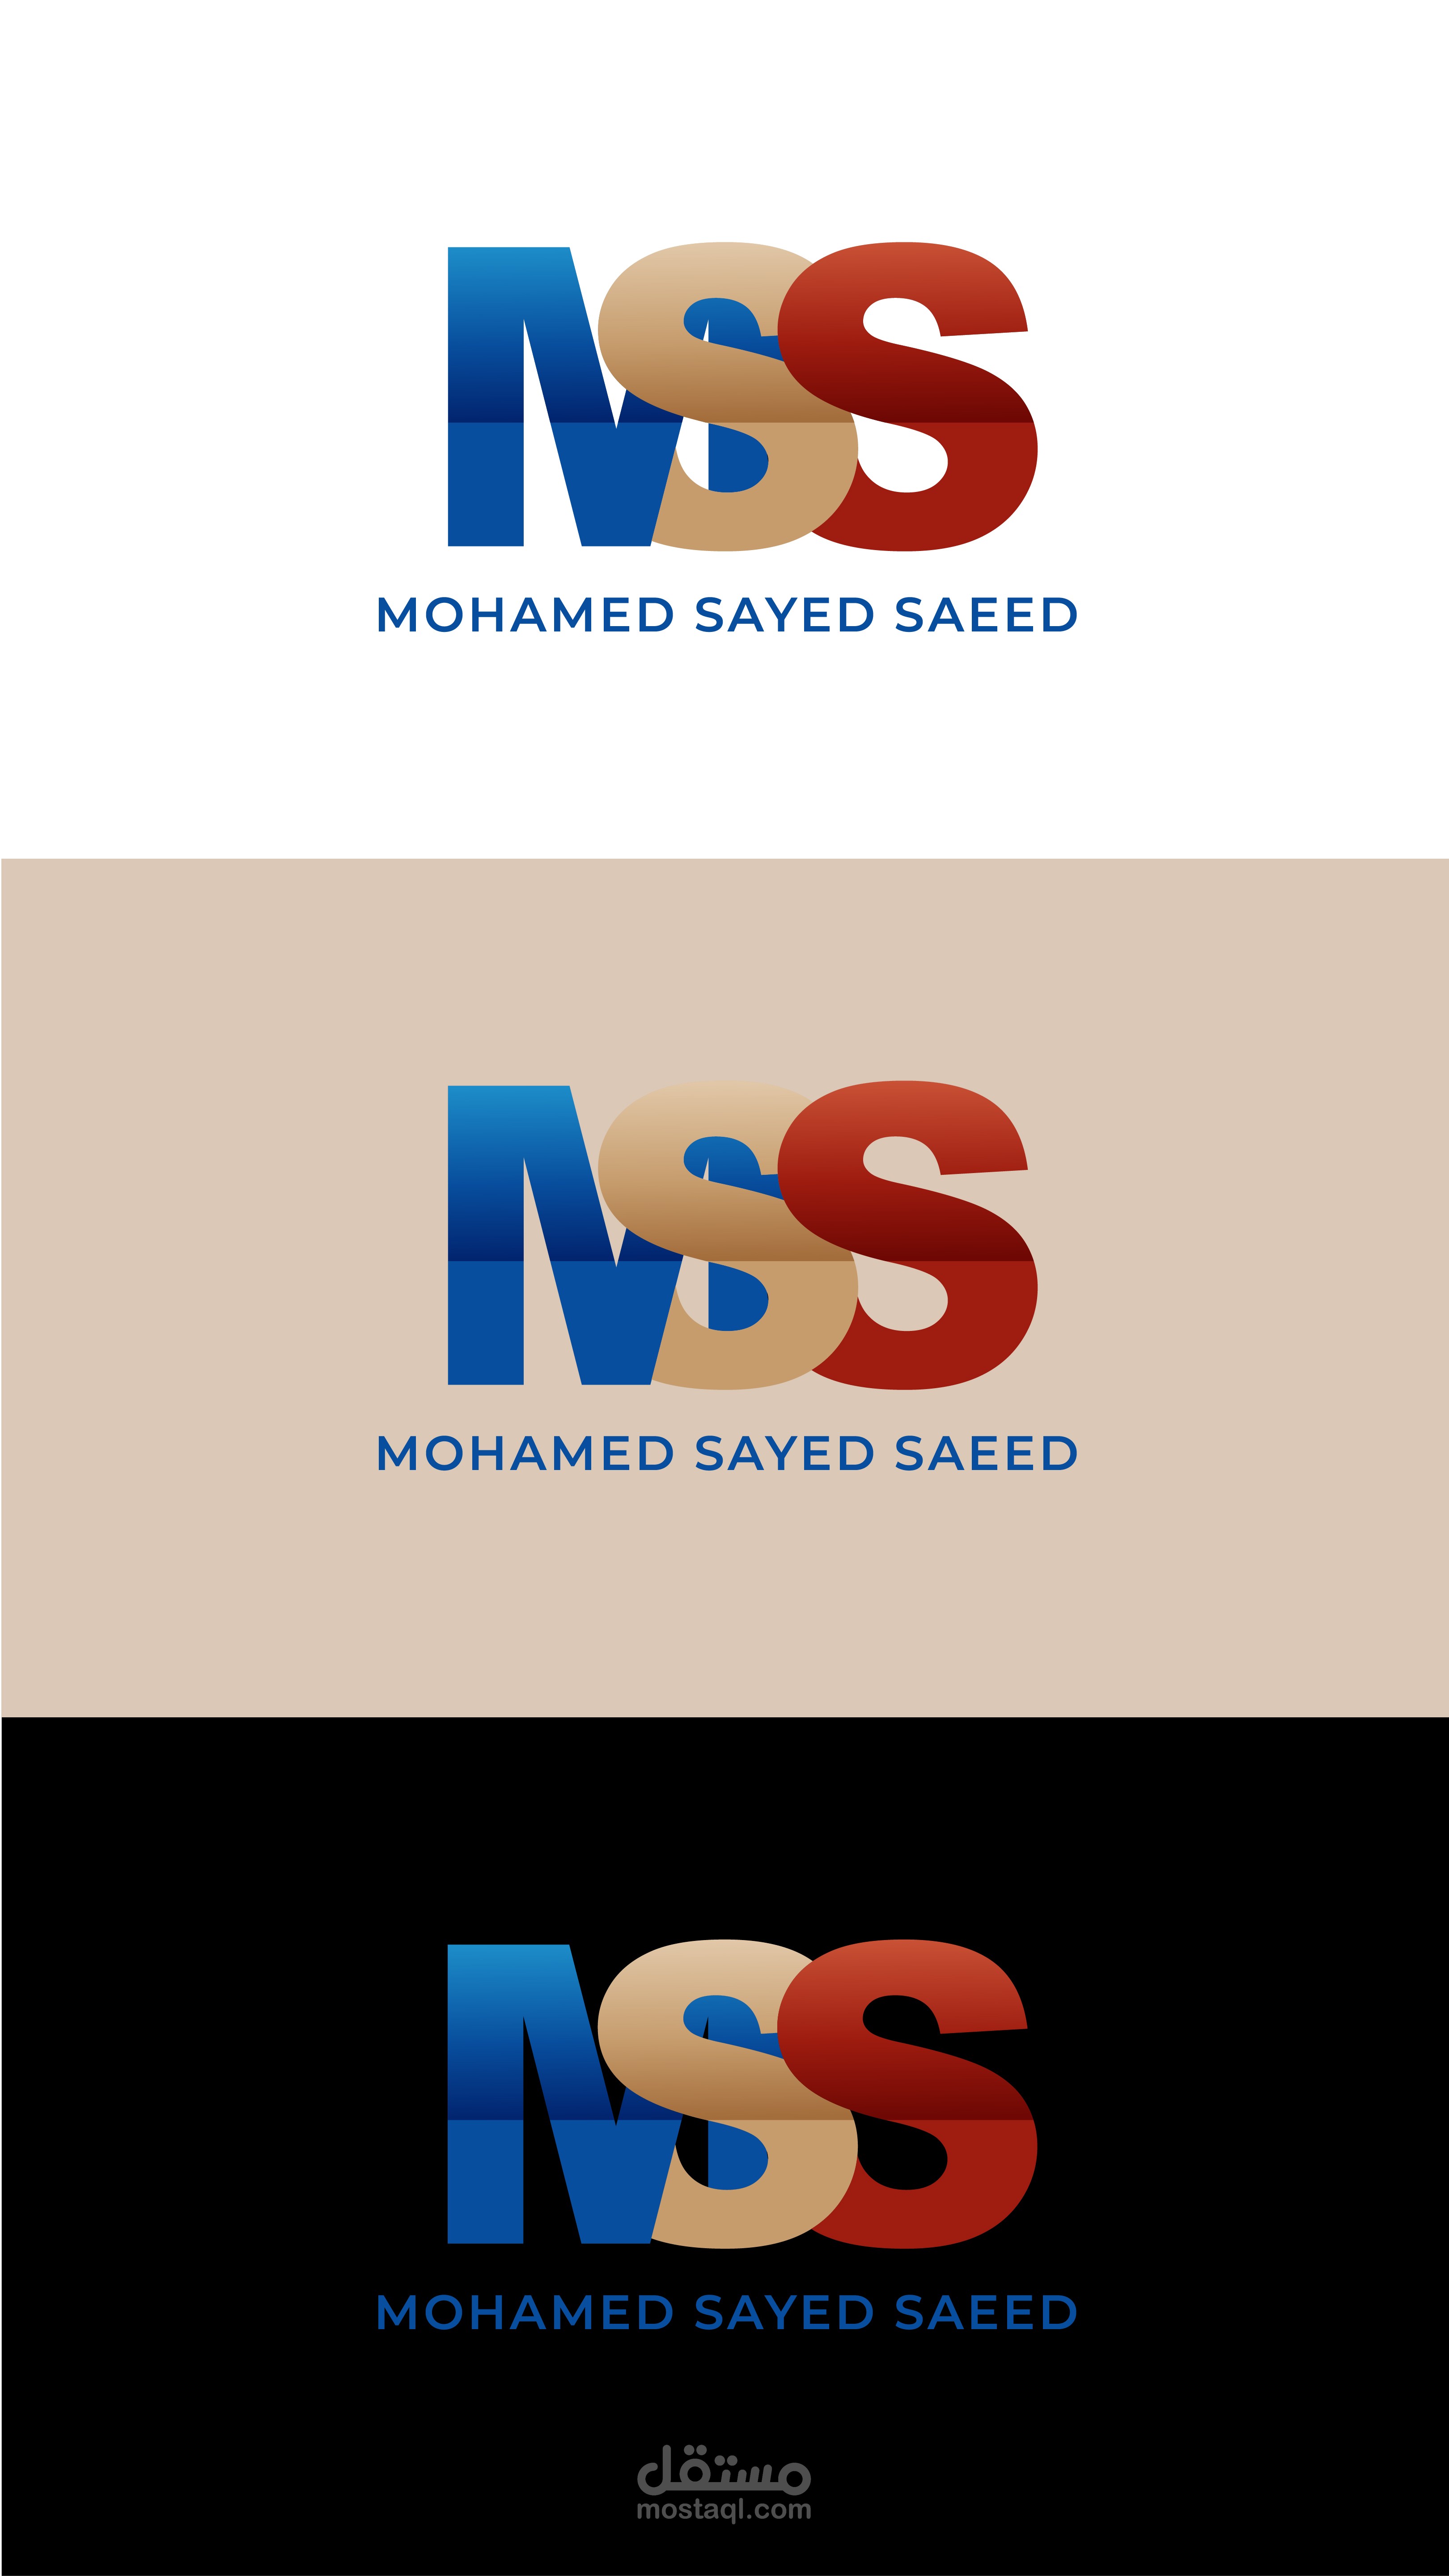 Use of logos and marks | MSS Global